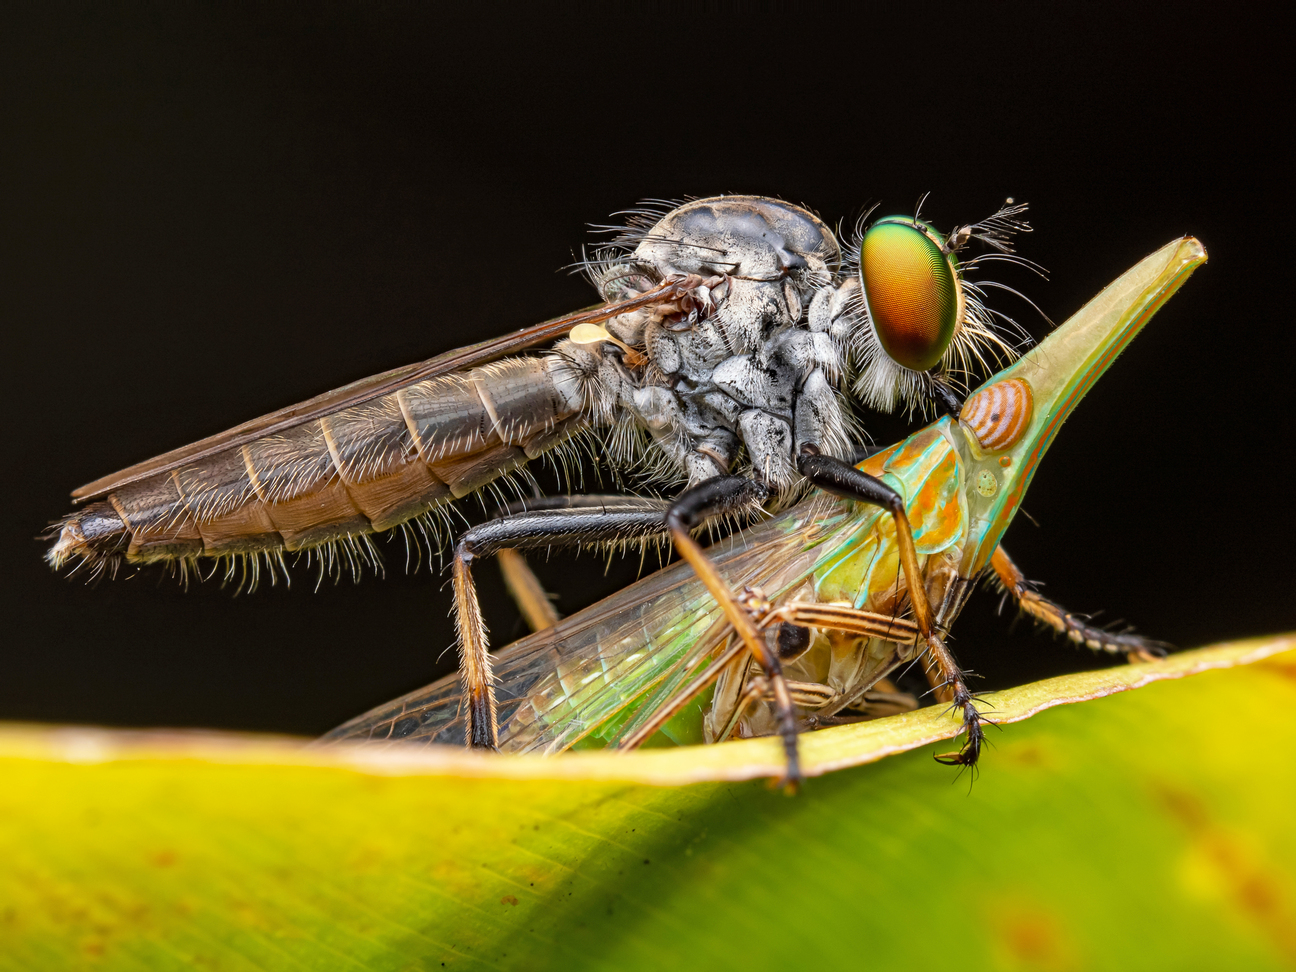 A robber fly catches a leafhopper for early dinner. Photo: Peter Grob, participant in Insects category.  ​​📷 Fly catching a grasshopper ⁣ Category insects⁣ Peter Grob | cupoty.com⁣